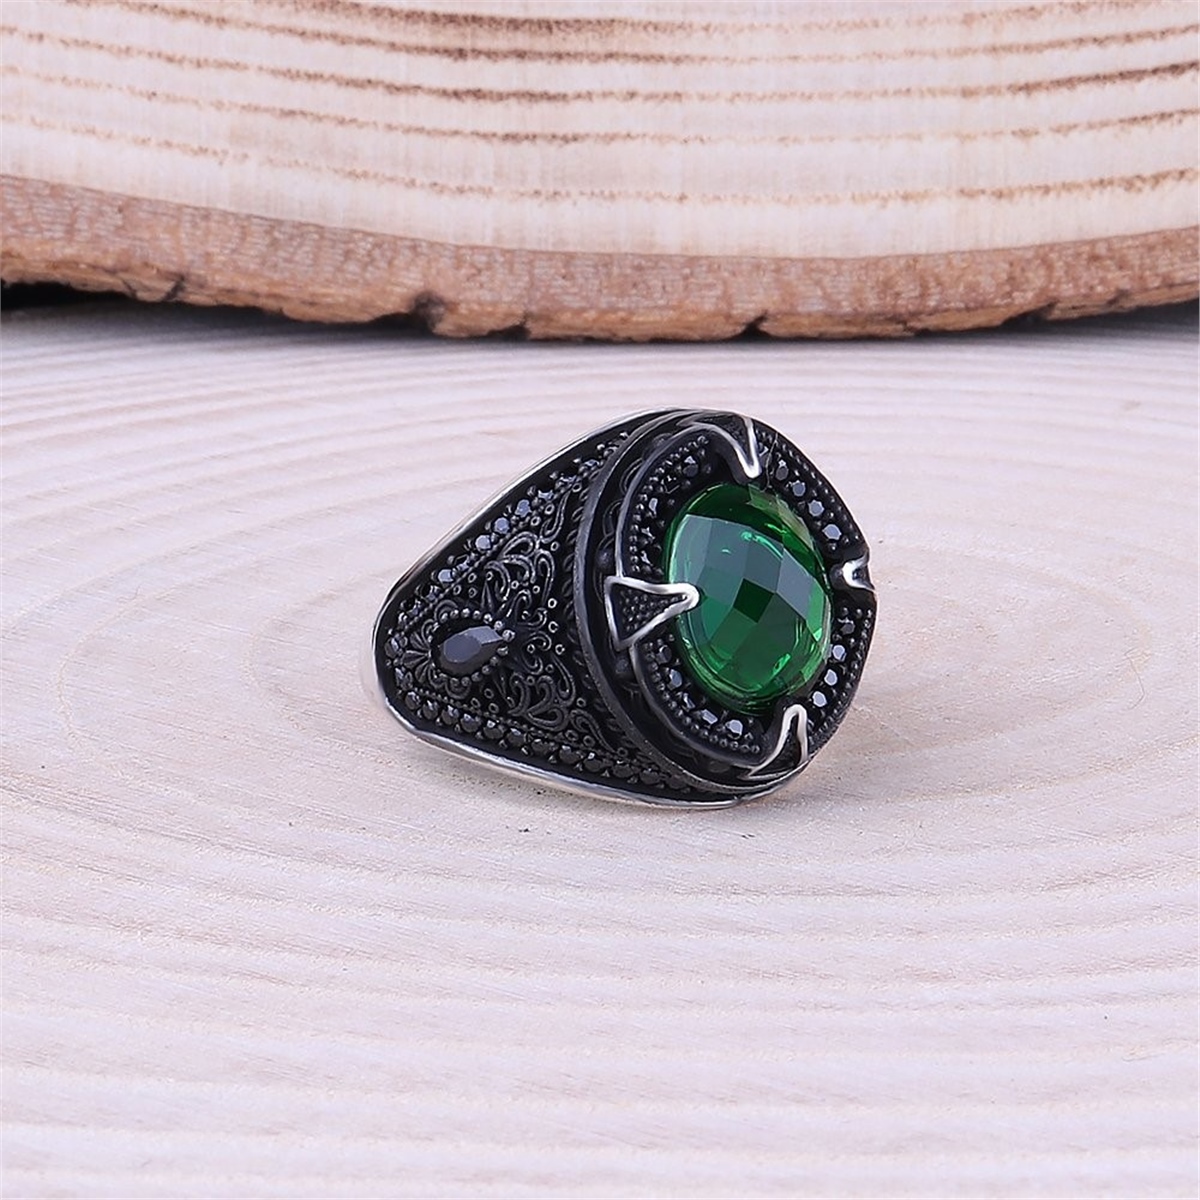 Green Zircon Stone Micro Stone Embroidered 925 Sterling Silver Men's Ring